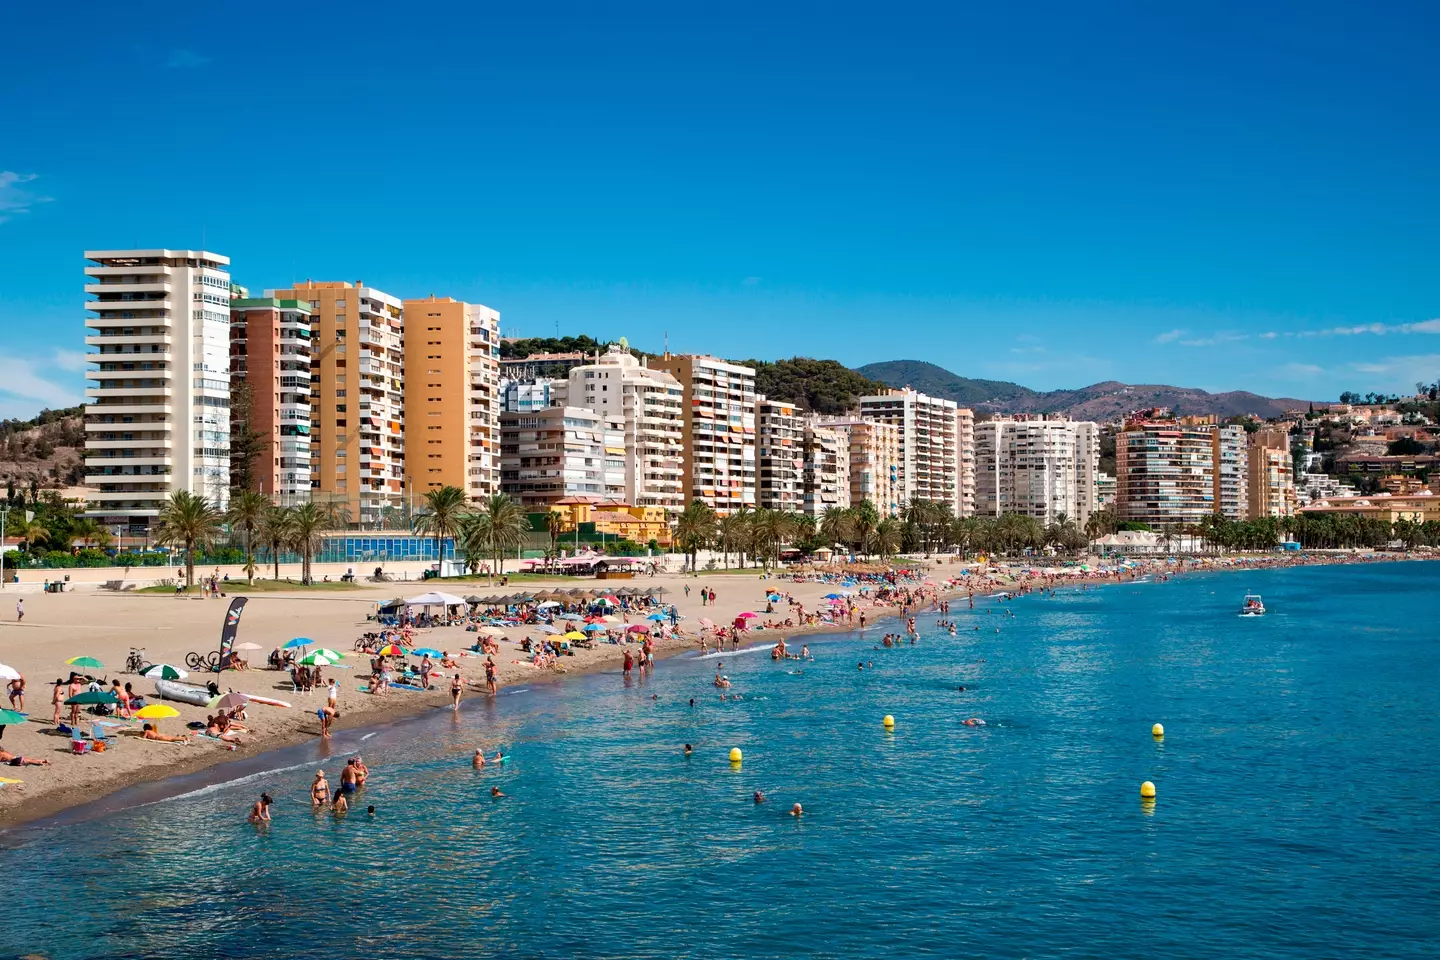 Holiday let owners in Andalucia have protested against the rules. (Getty Stock Image)